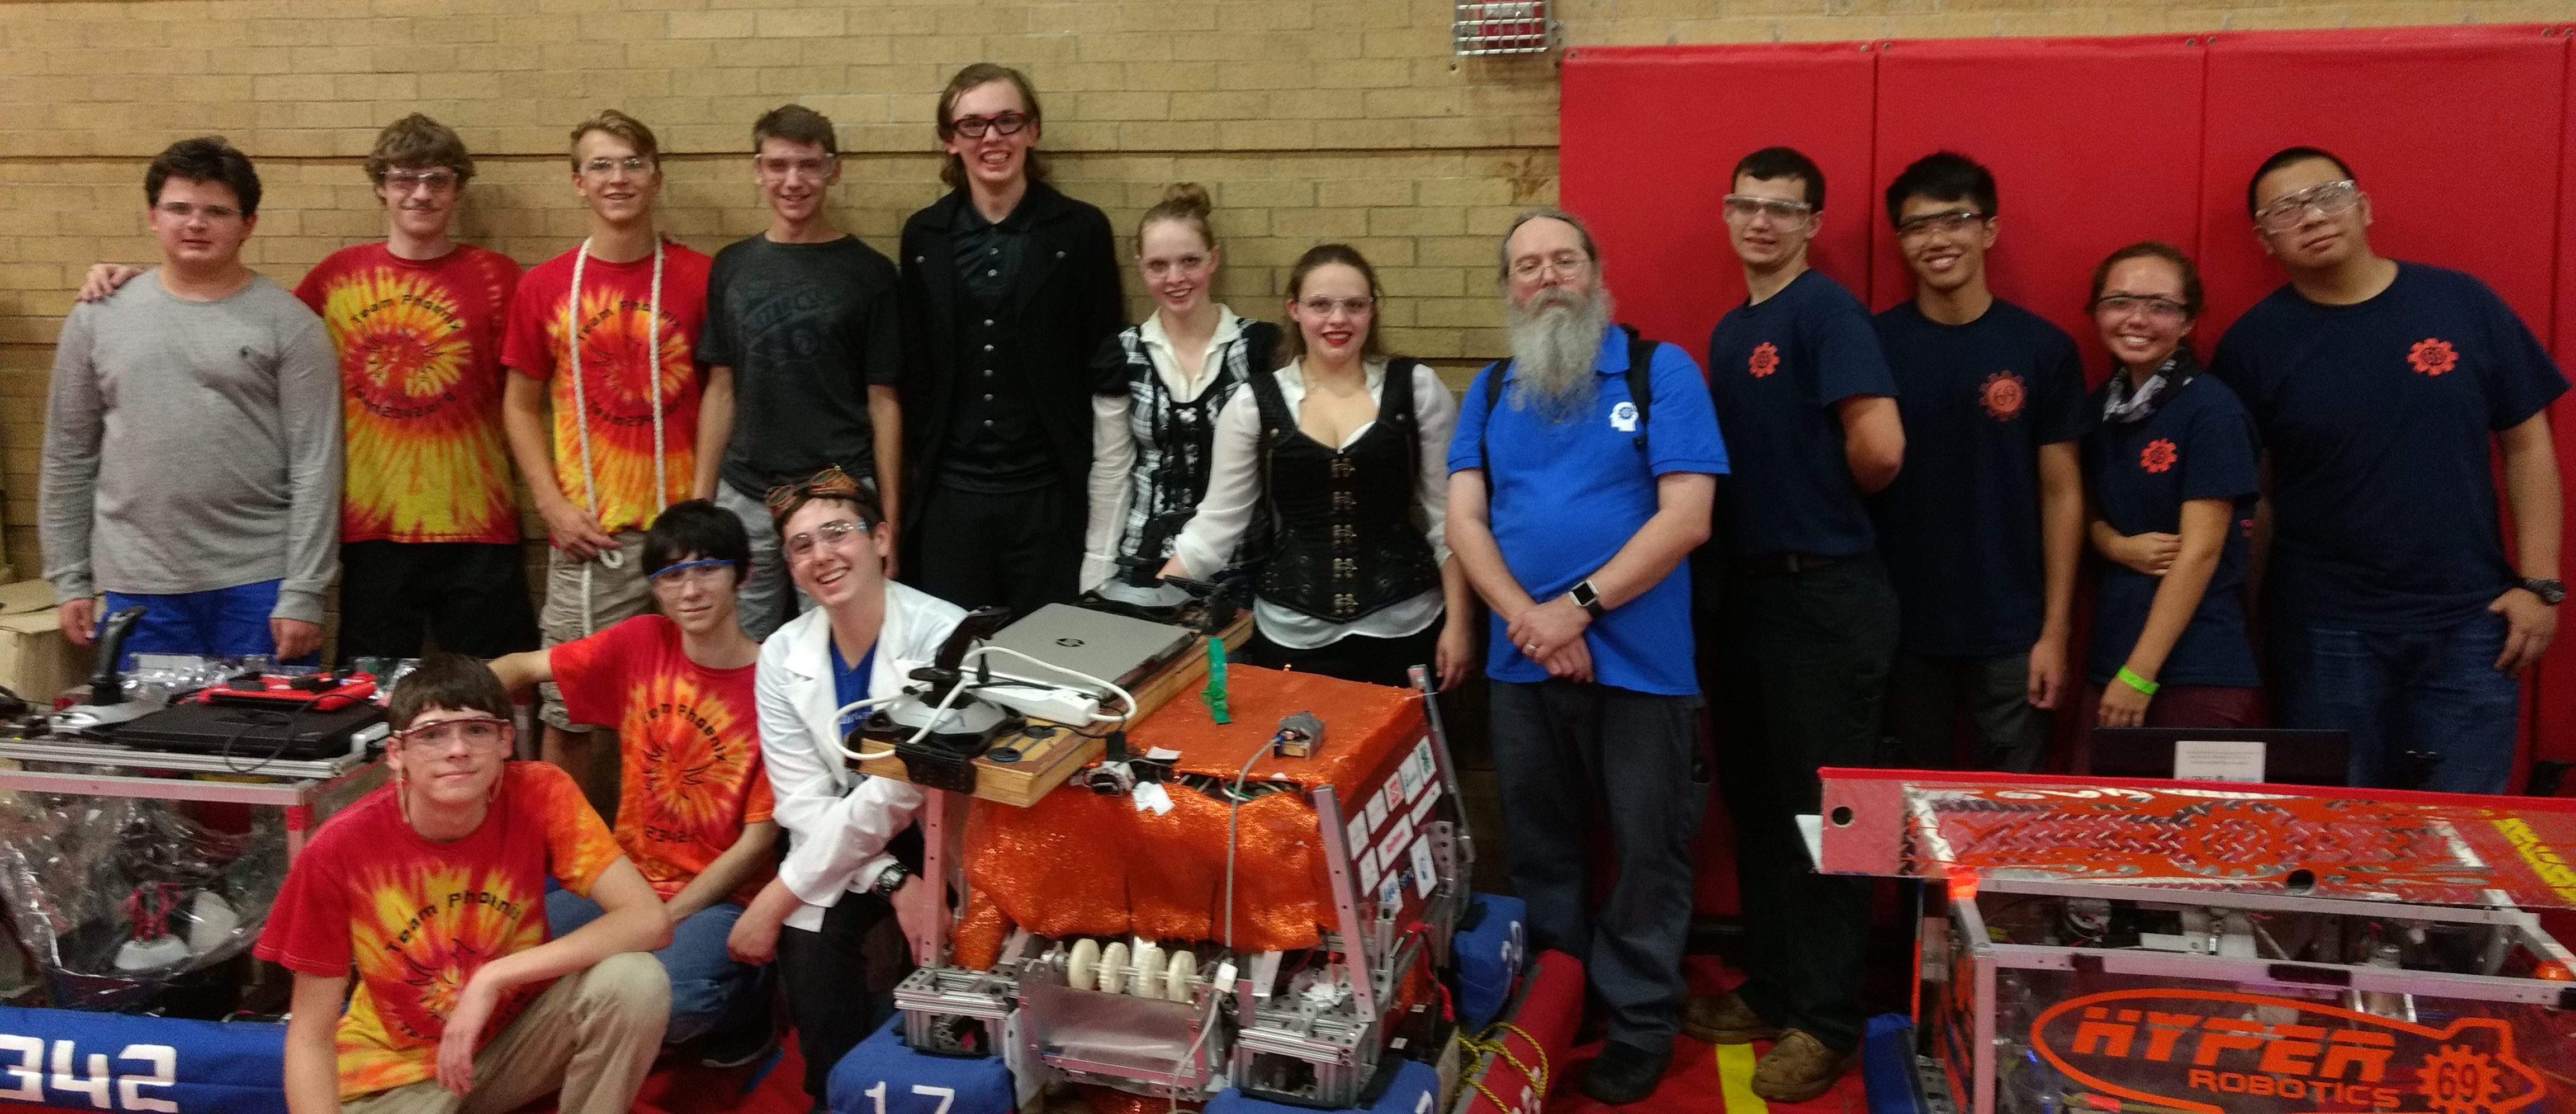 Our playoff alliance at RiverRage 2017 Team Phoenix - 2342, Team Inconceivable! - 1720 and HYPER - 69.